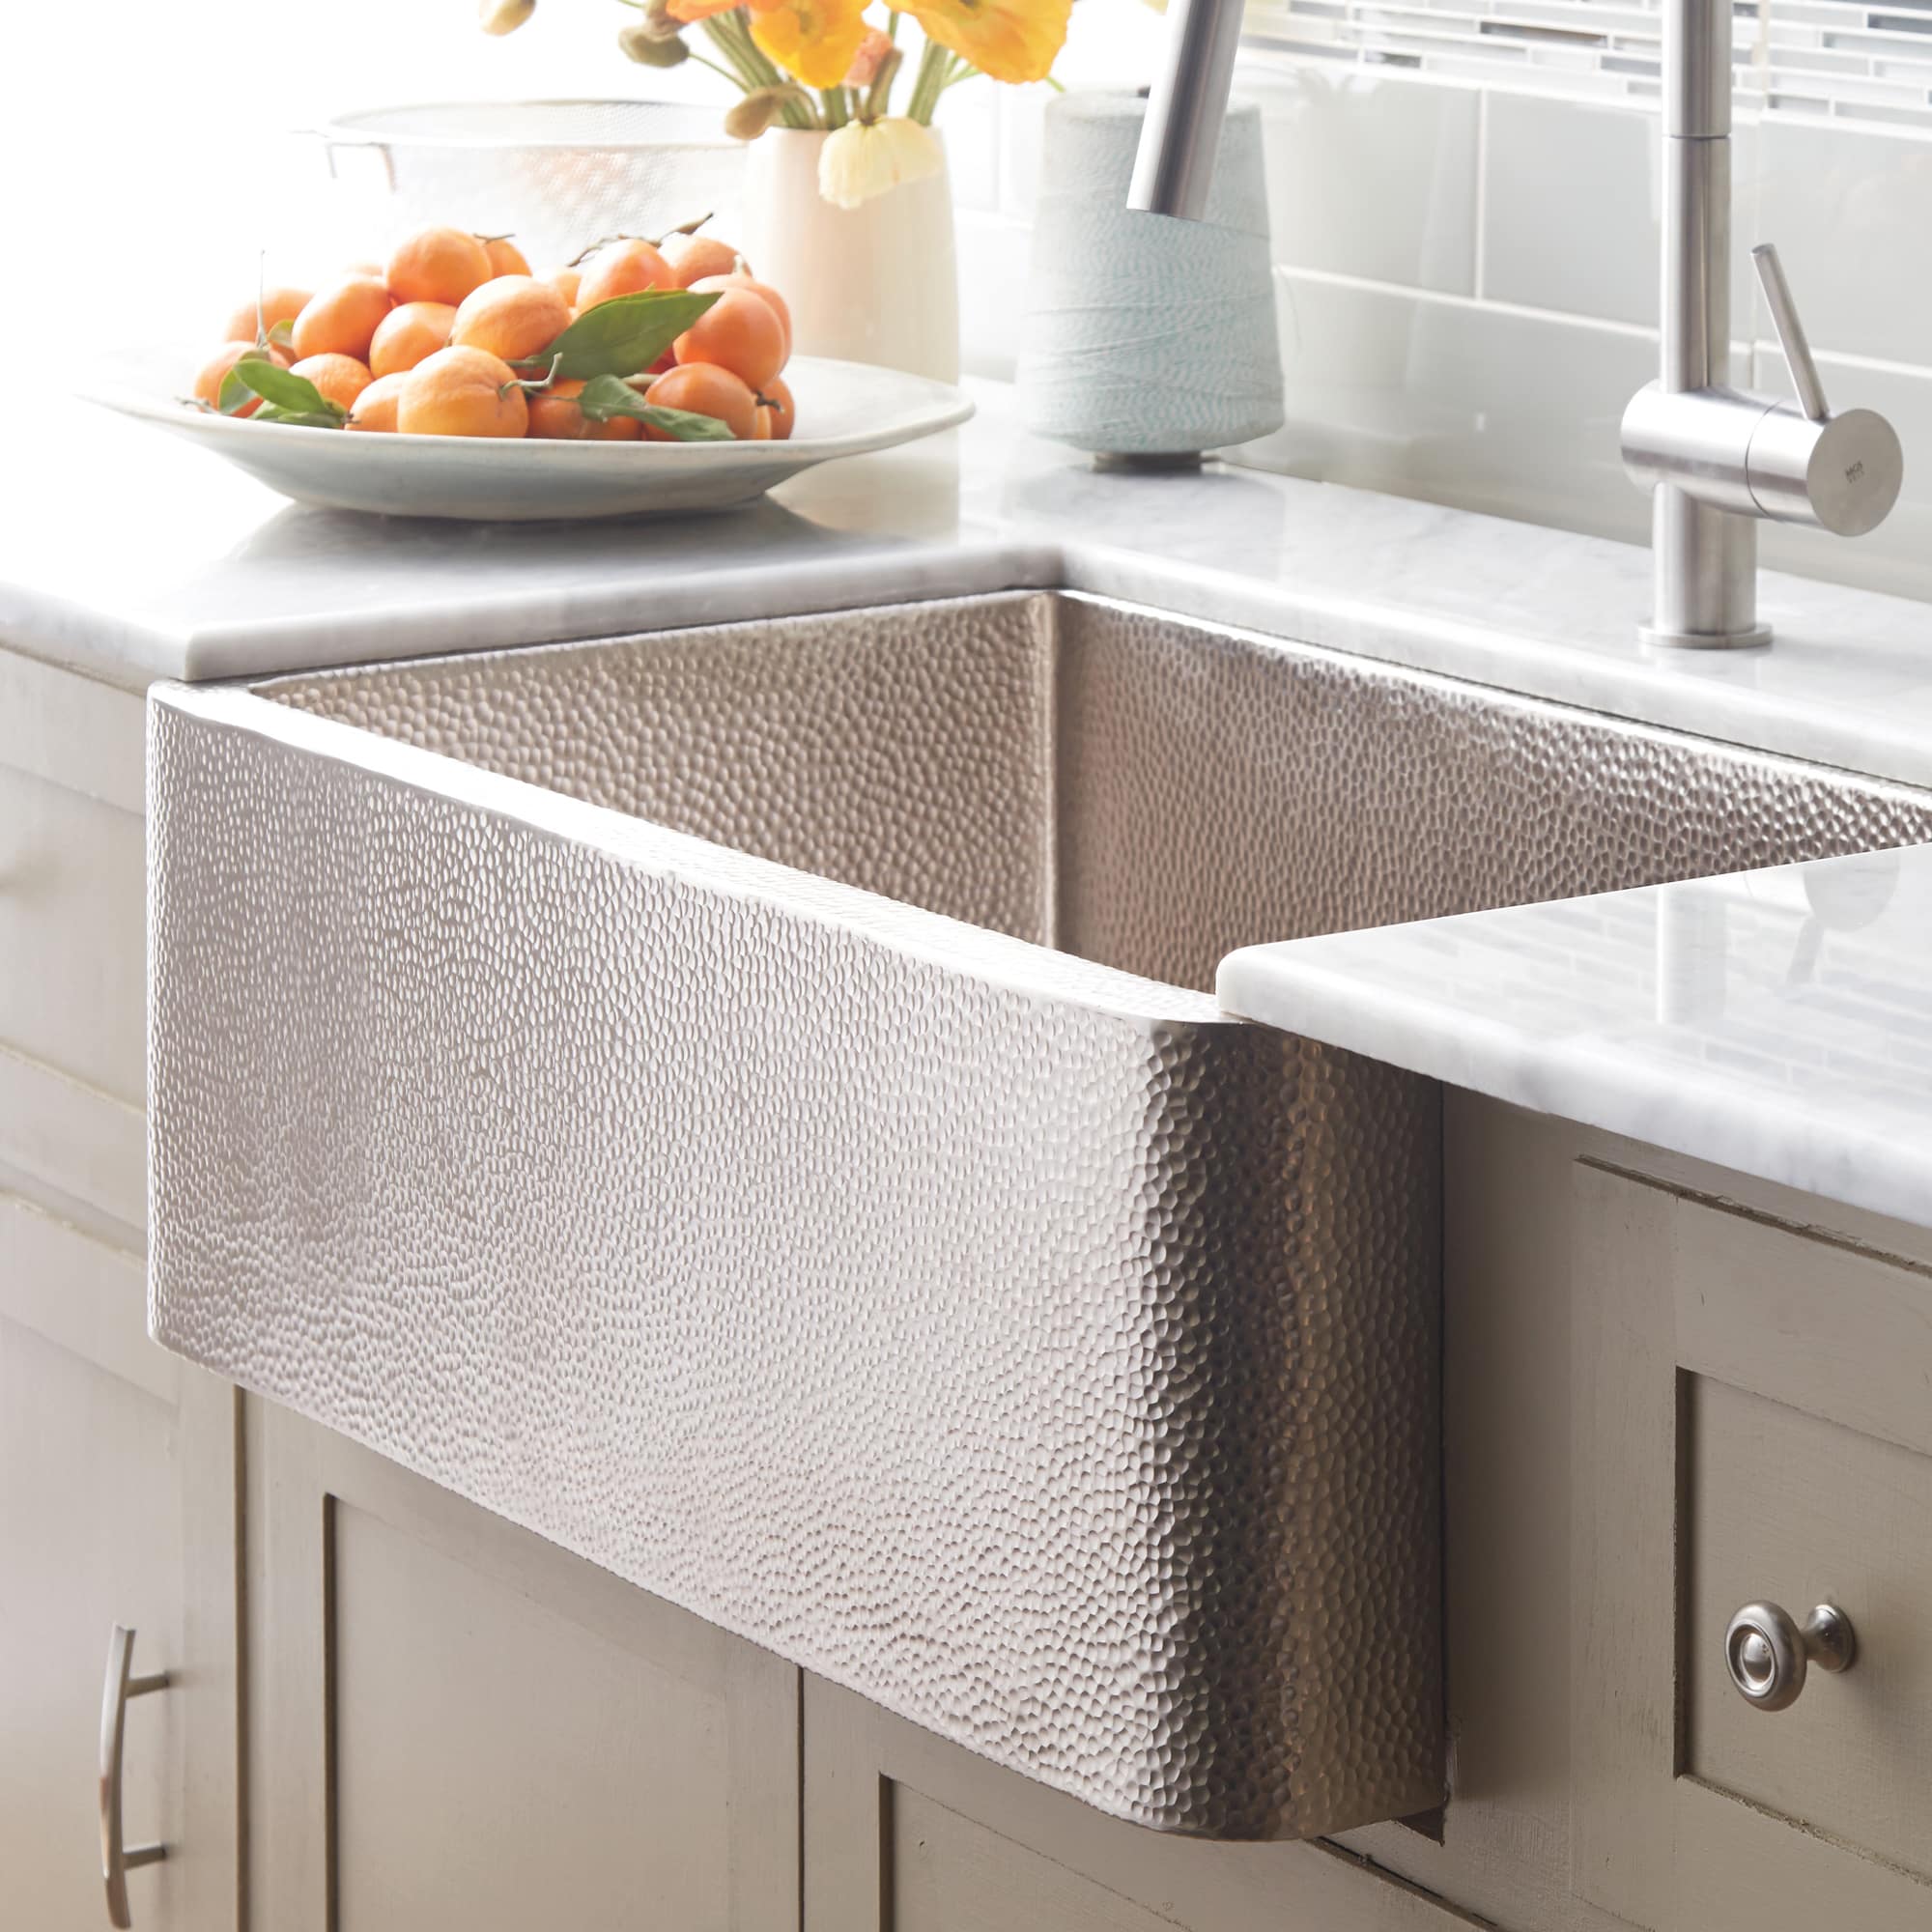 Native Trails 33 Nickel Farmhouse Sink, Brushed Nickel, CPK573